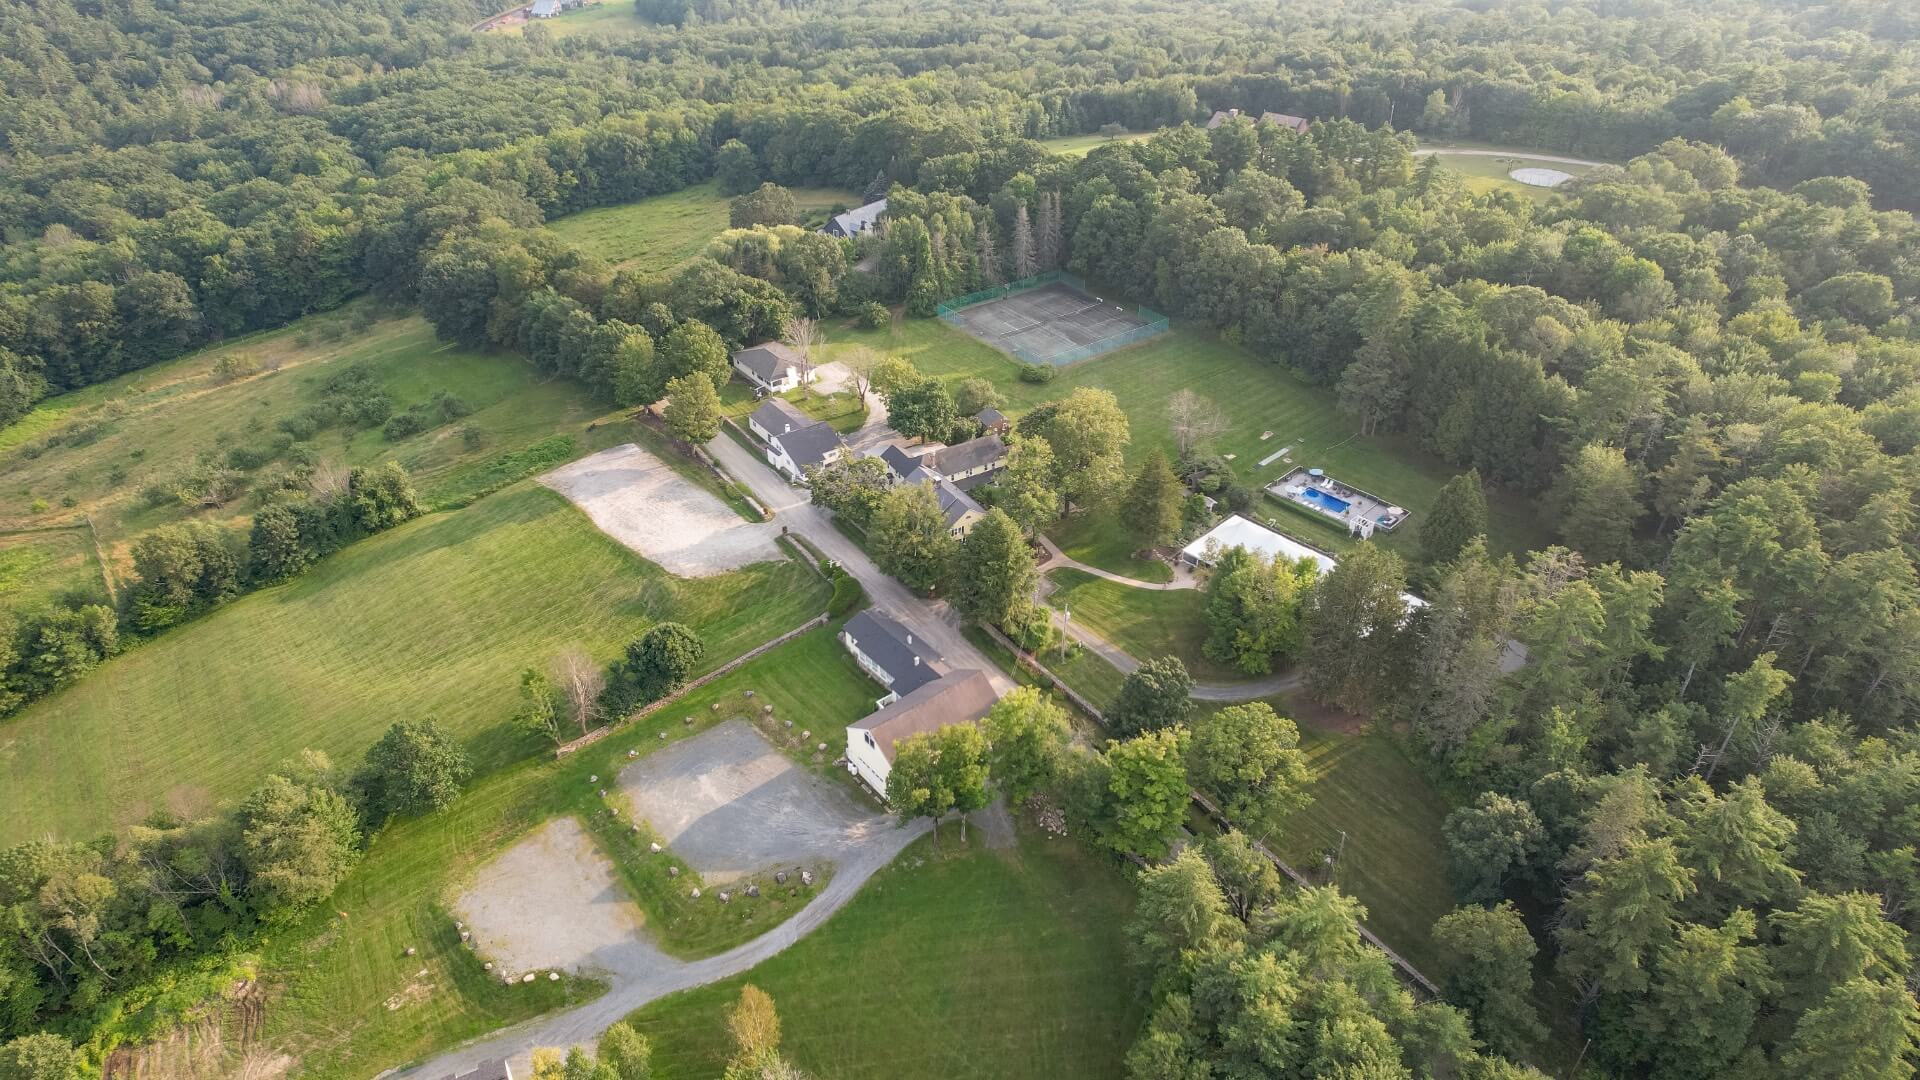 An aerial photo of an estate with a large house, tennis courts, swimming pool, and lots of grounds and outbuildings.